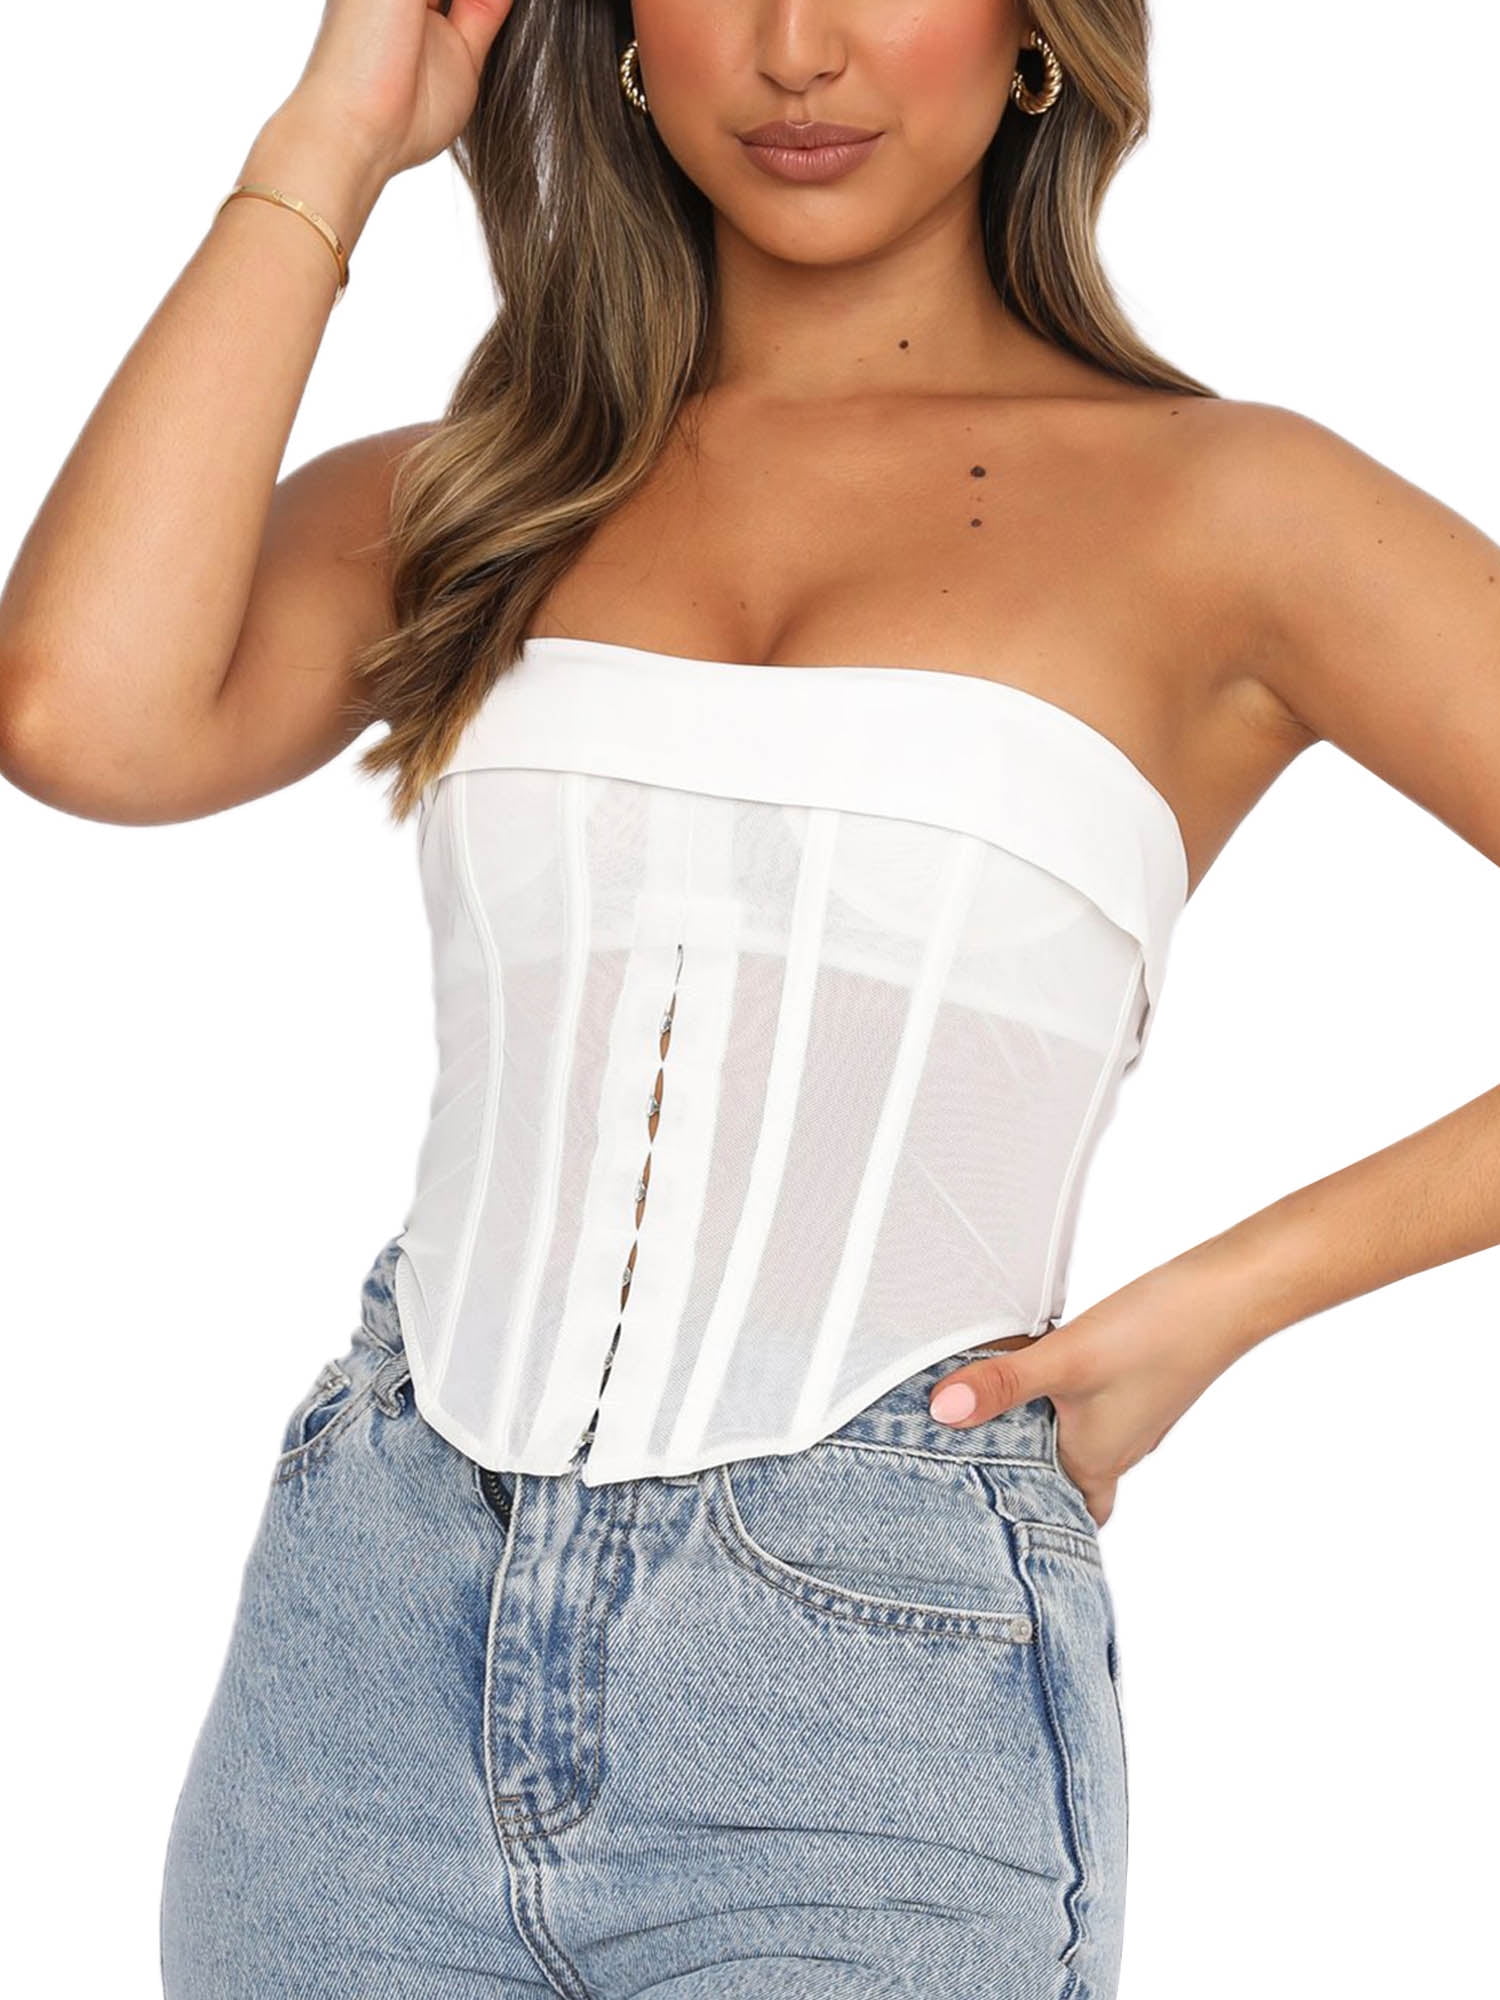 wybzd Women's Strapless Mesh Bustier Corsets Sleeveless Crop Tube Top  Camisole Tank Tops White M 